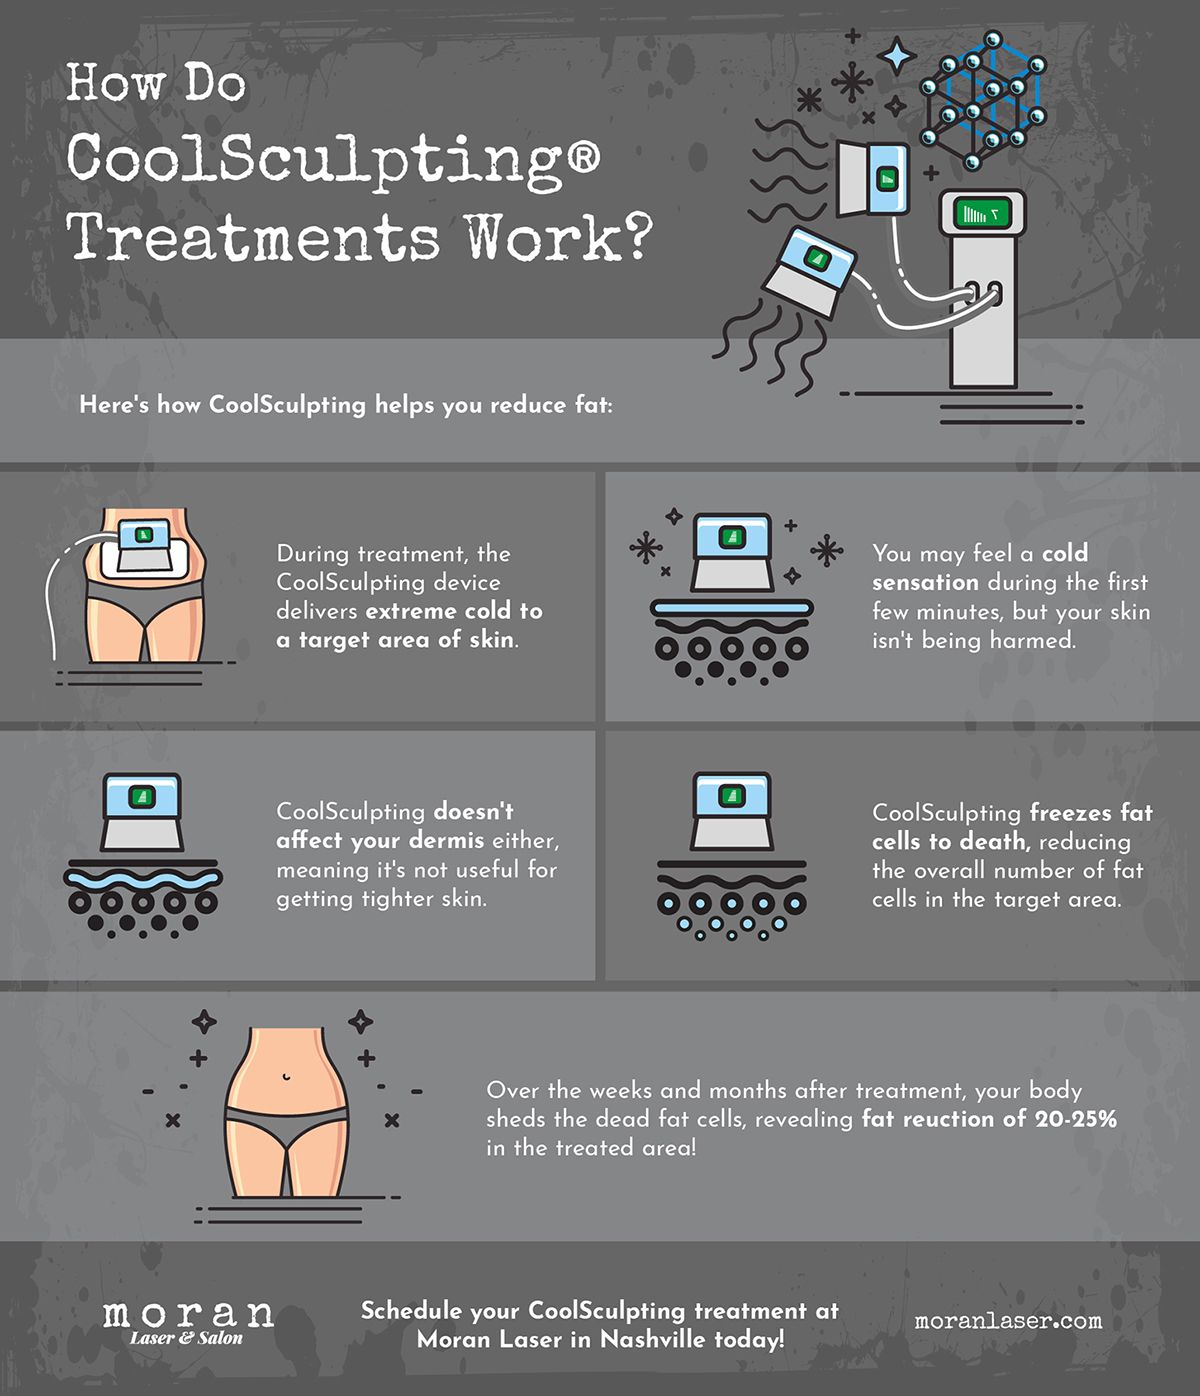 How-Do-CoolSculpting-Treatments-Work-01-604abfed9eefb.jpg